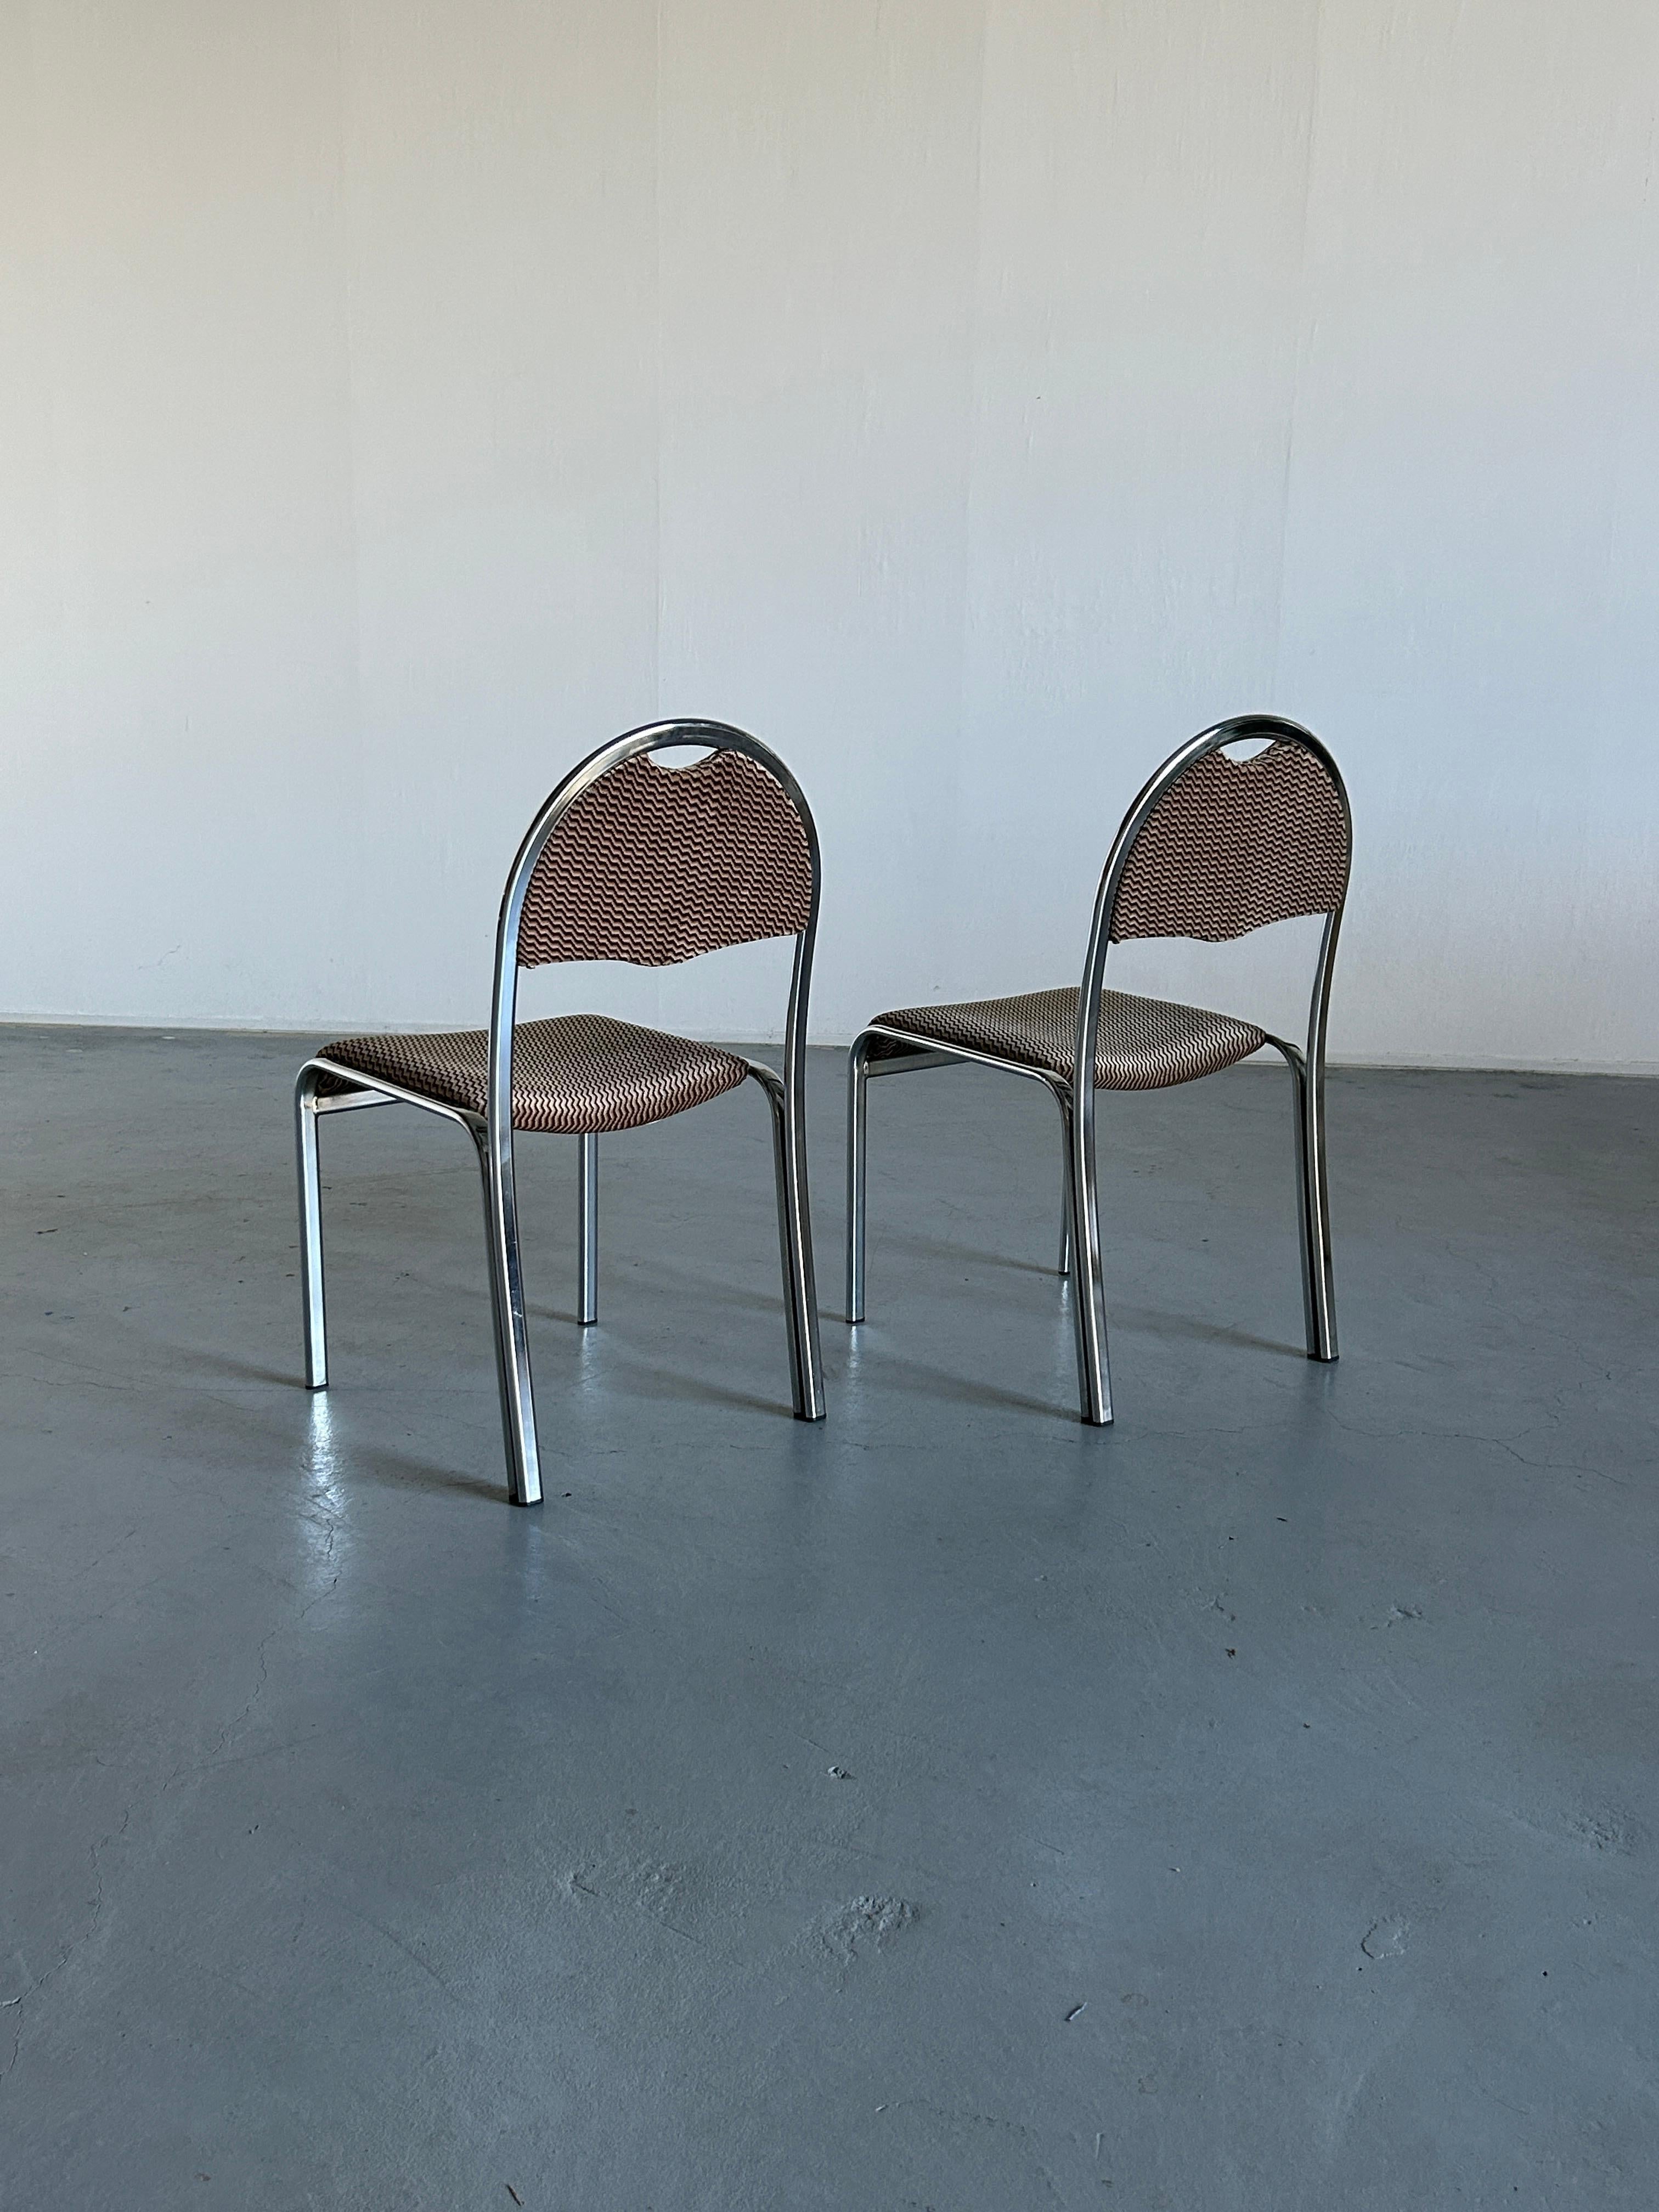 Pair of Vintage Mid-Century Modern Dining Chairs In Style of Saporiti, 70s Italy For Sale 4